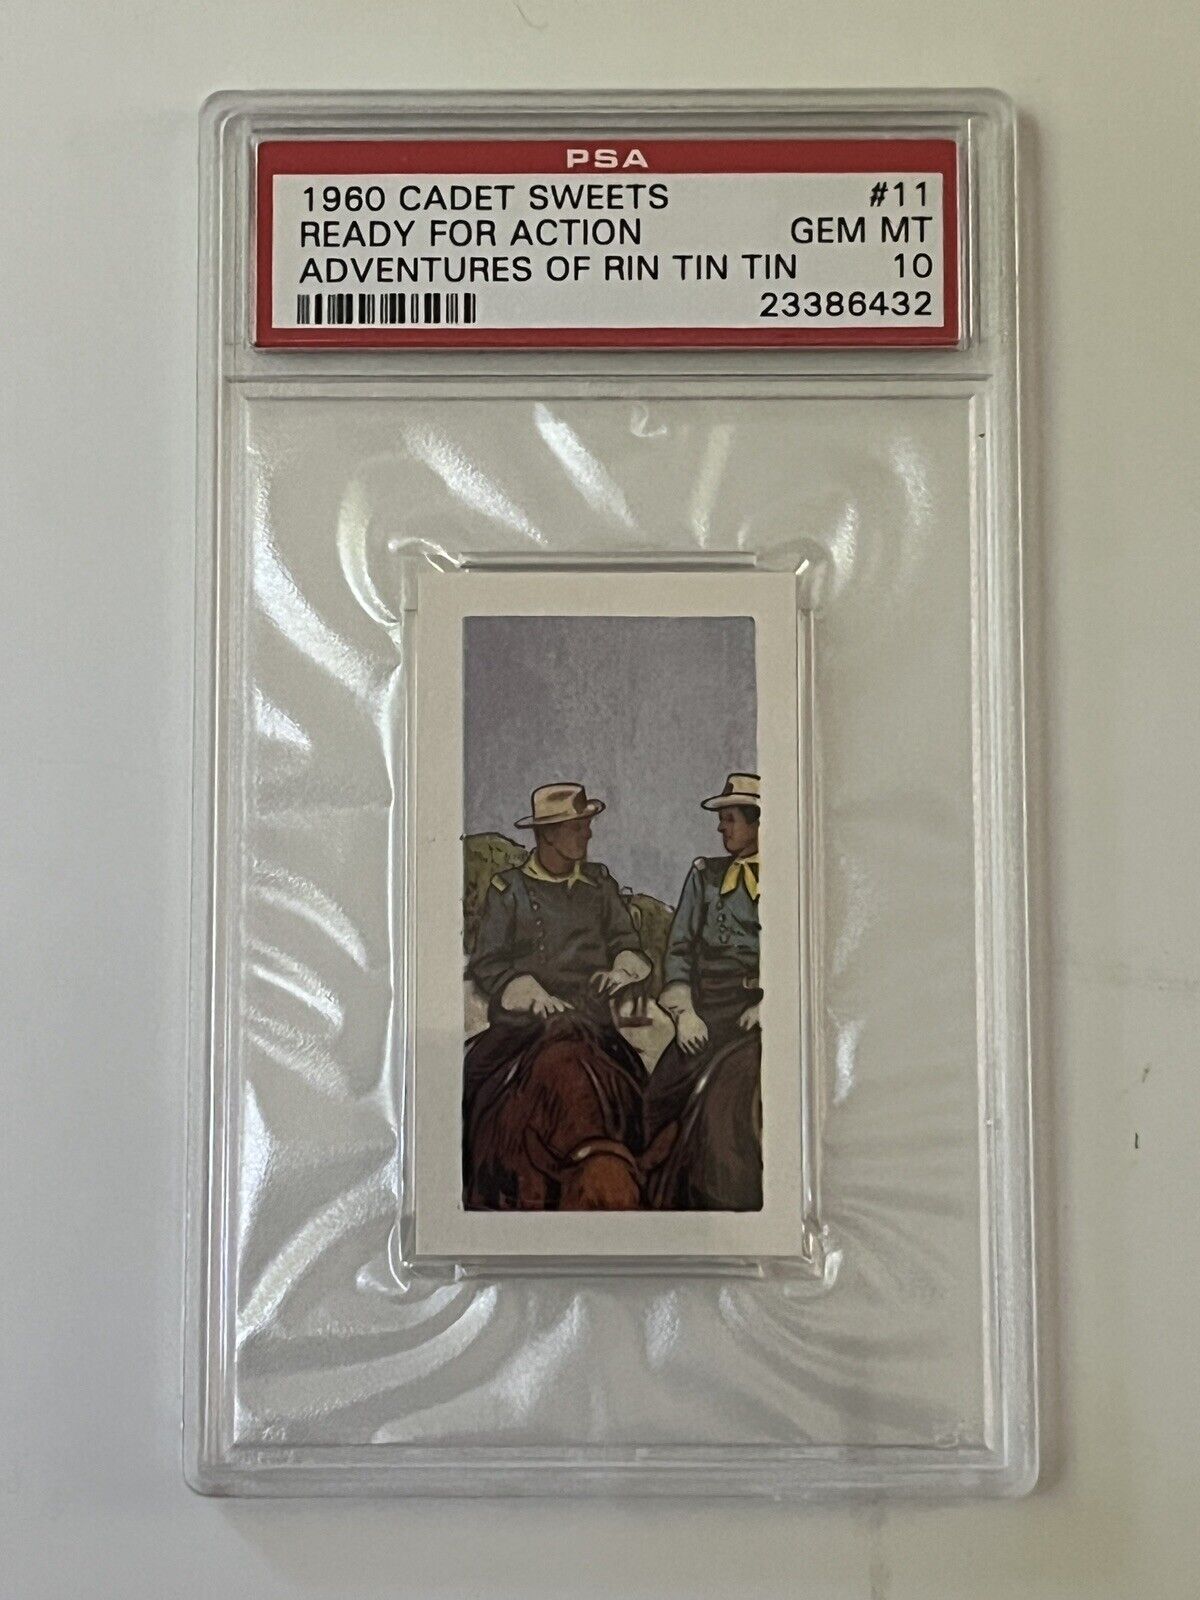 1960 Cadet Sweets Adventures Of Rin Tin Tin Ready For Action #11 PSA 10 GEM MINT